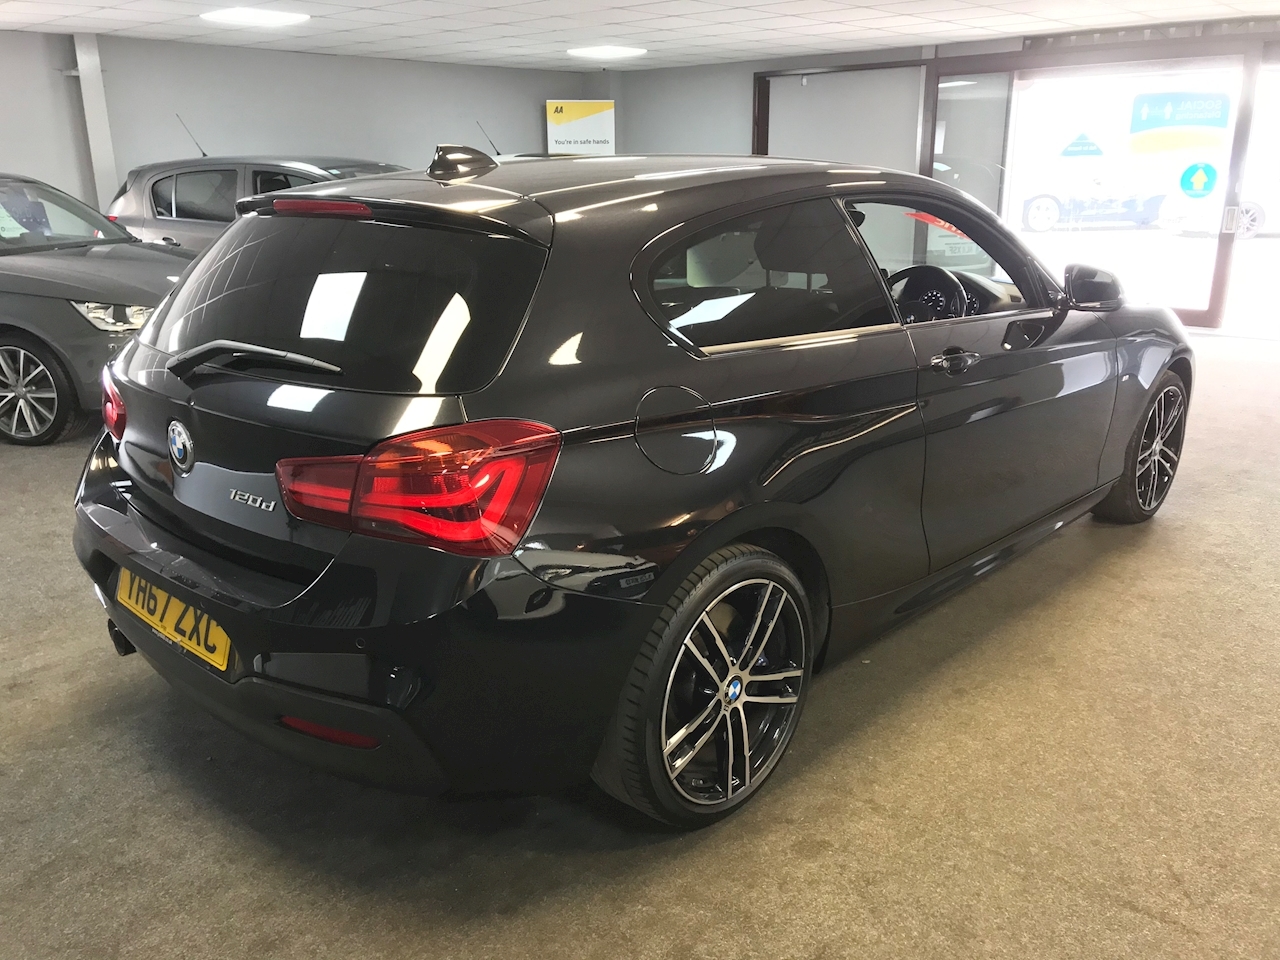 2.0 120d M Sport Shadow Edition Sports Hatch 3dr Diesel Auto (s/s) (190 ps)